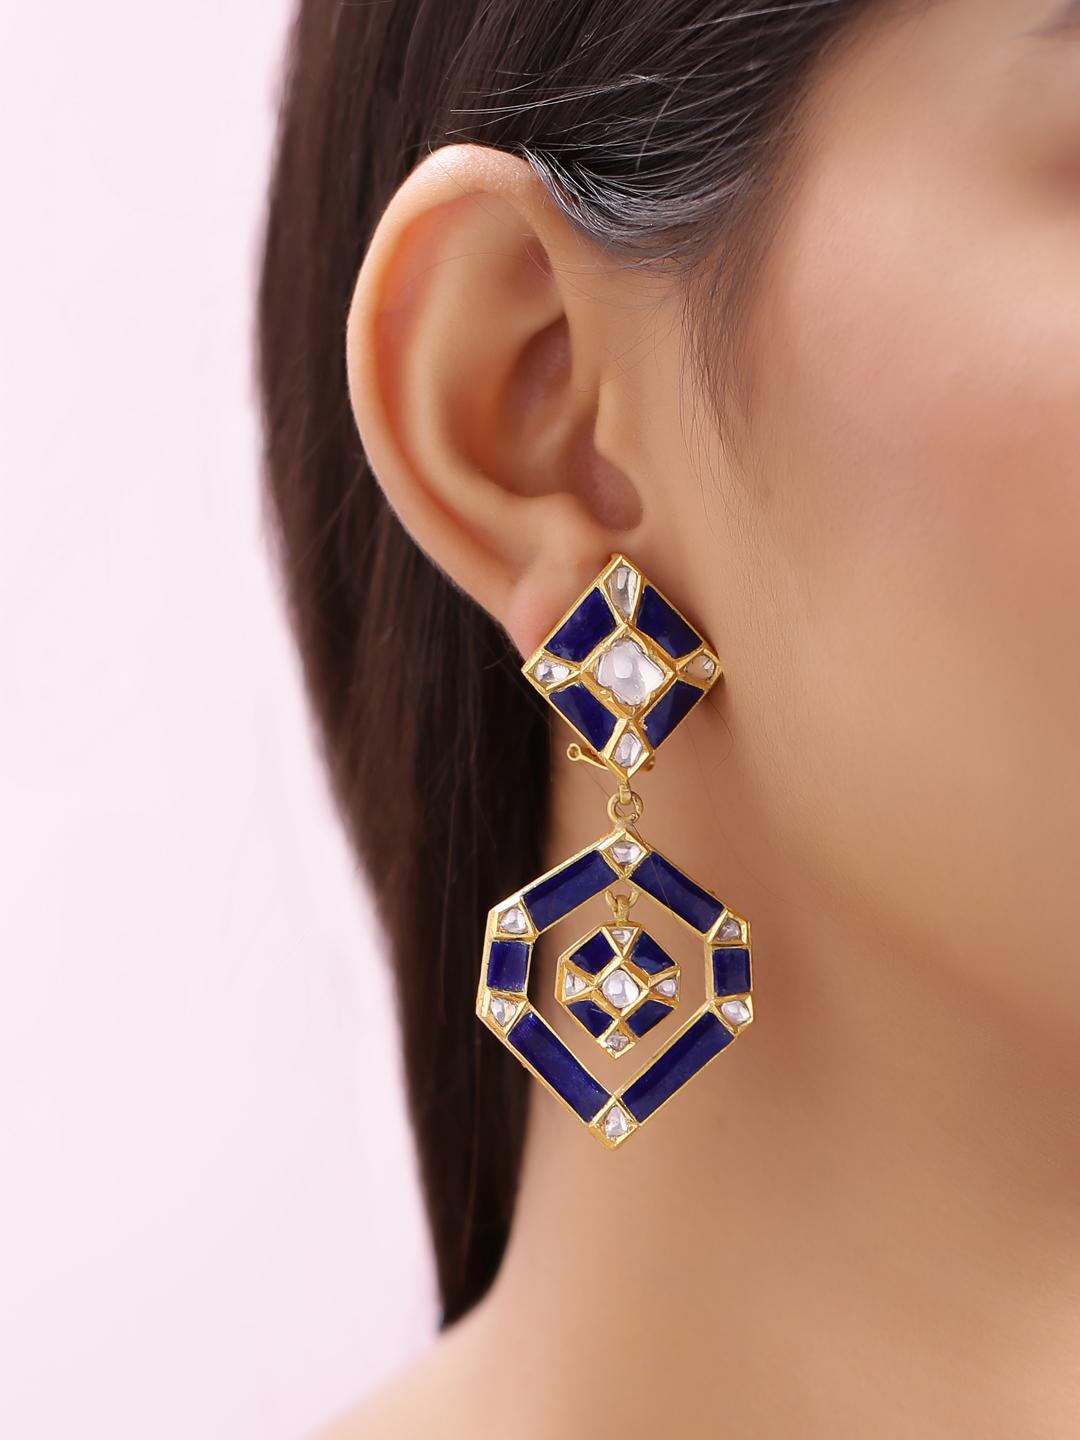 Rose Cut Geometrical Earrings Handcrafted in 18K Gold with Diamond and Fine Enamel Work For Sale